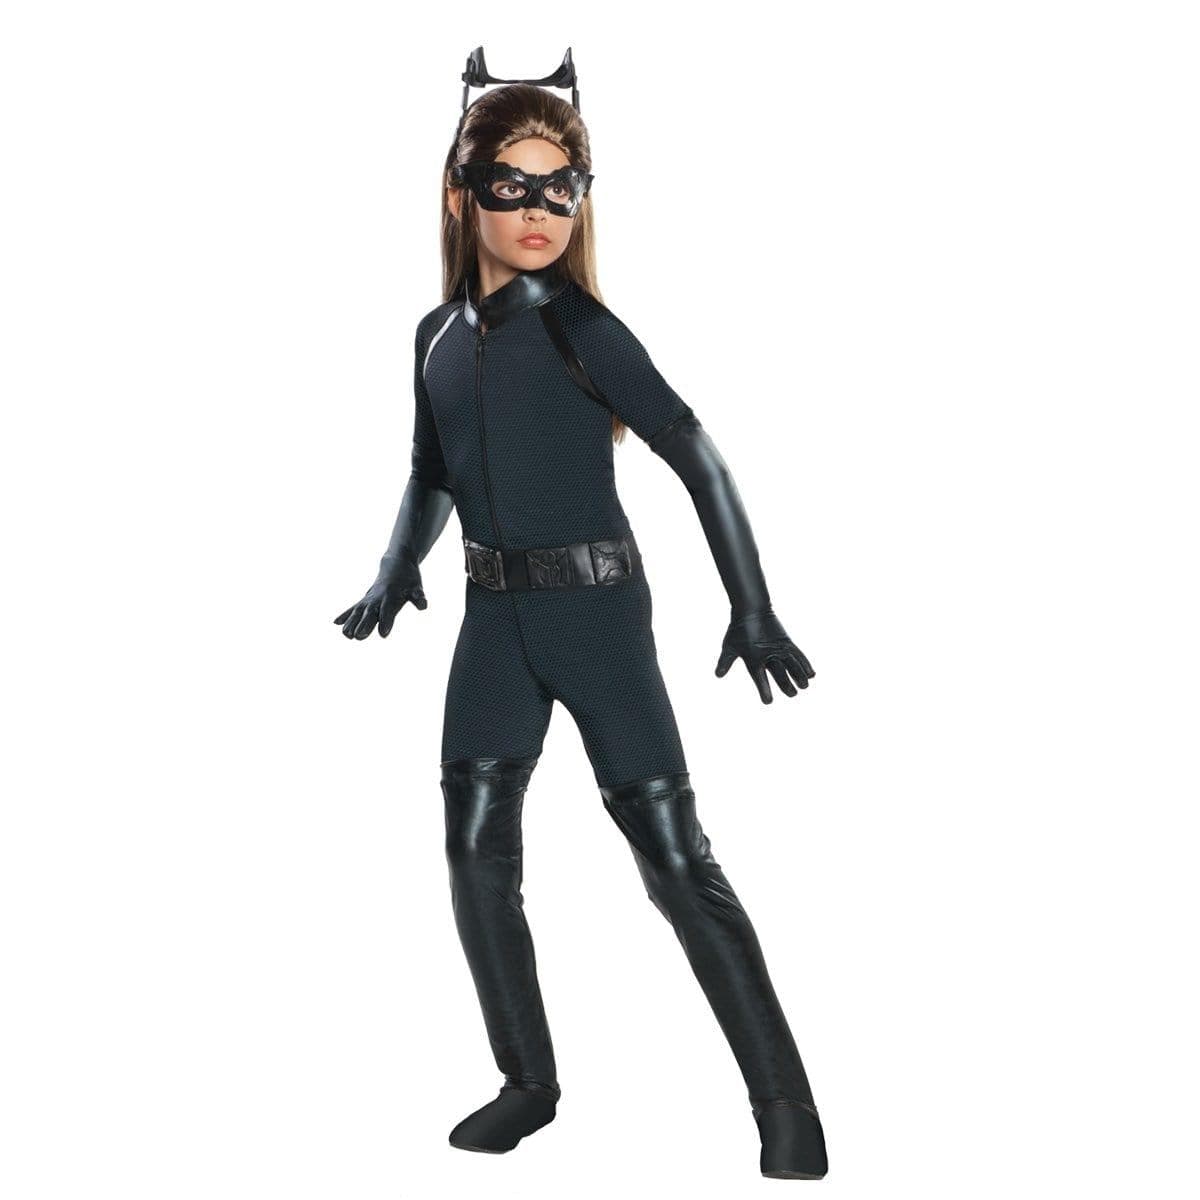 Catwoman Deluxe Costume for Kids, Batman